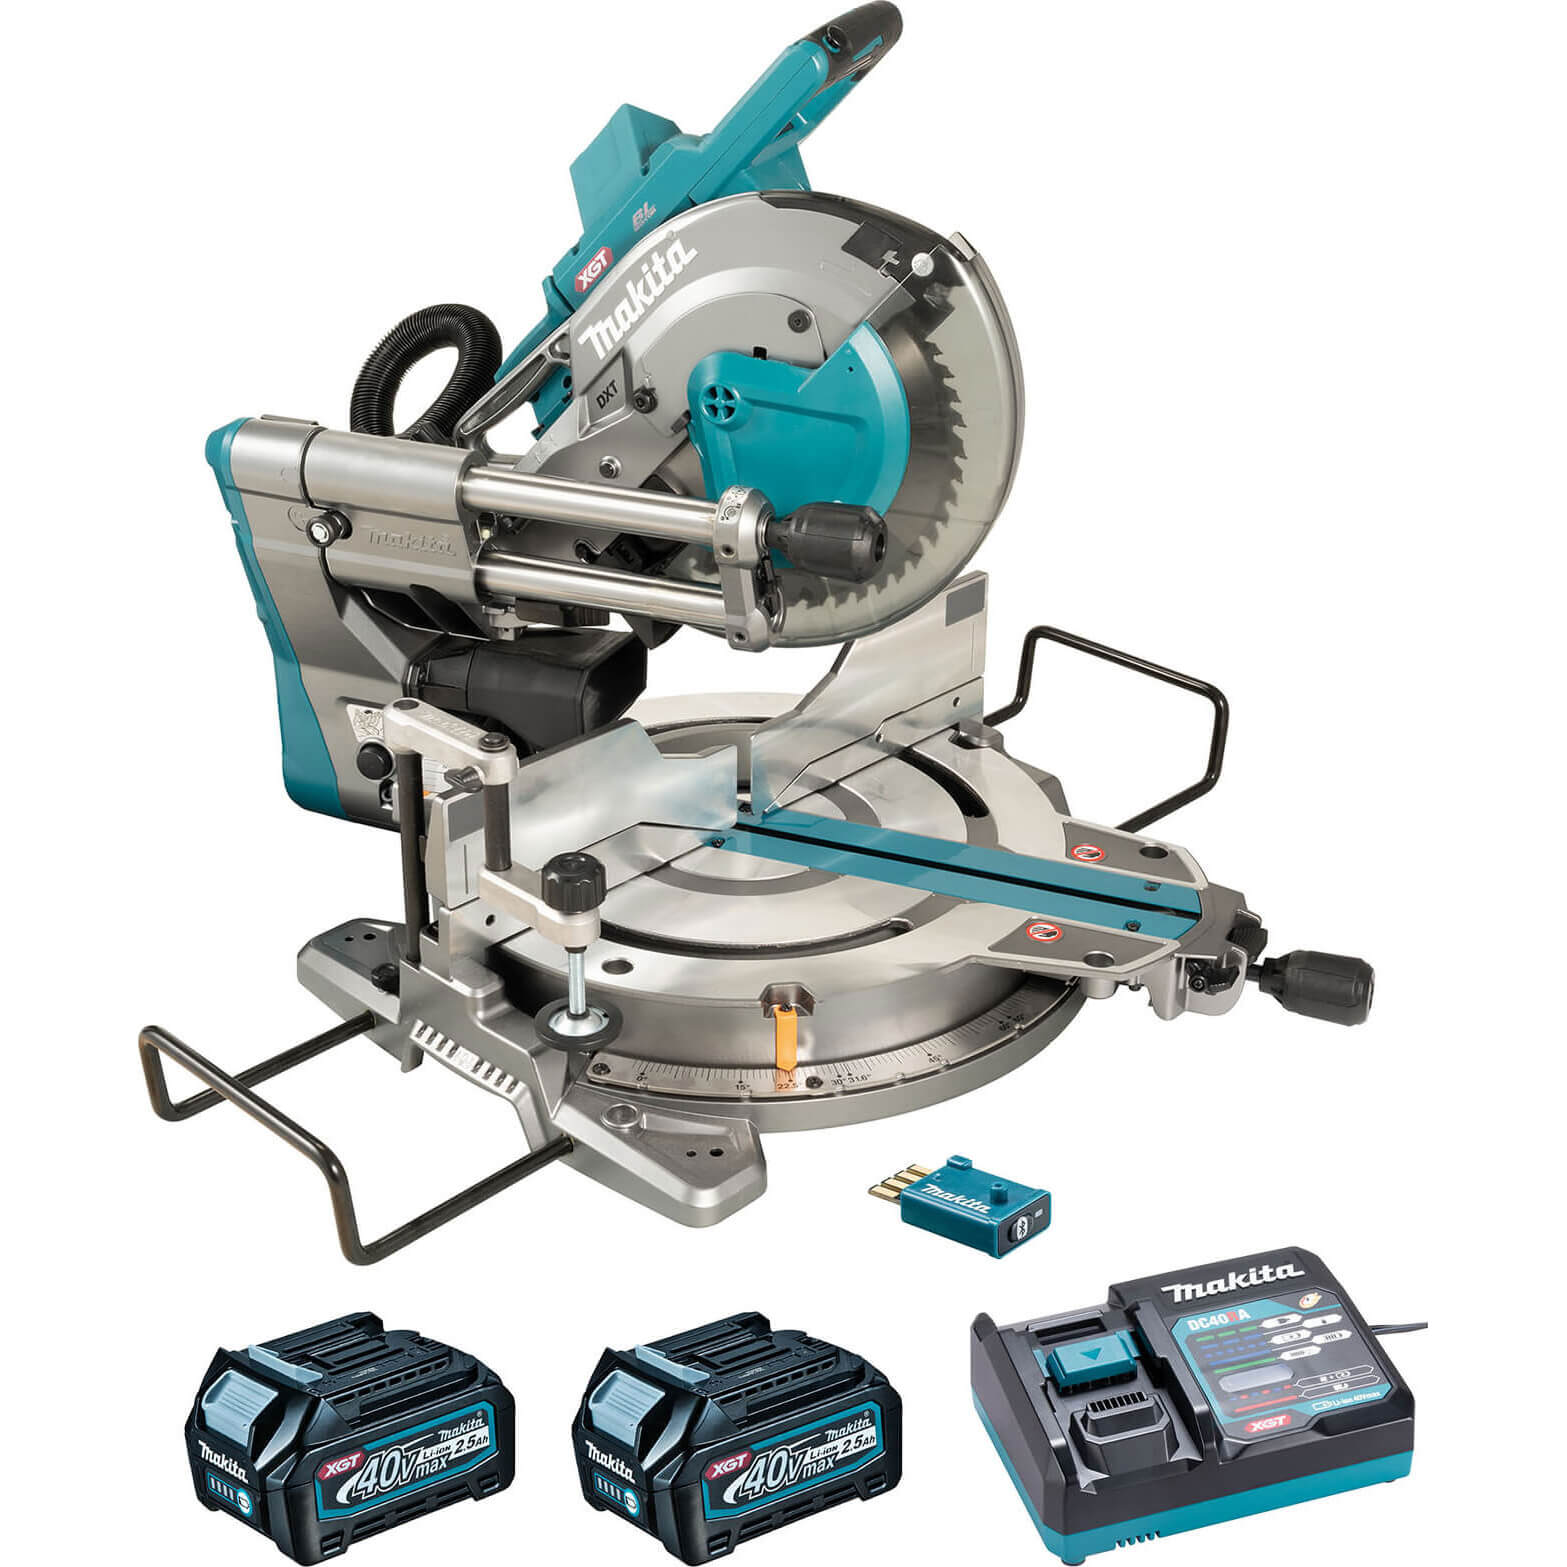 Image of Makita LS004G 40v Max XGT Cordless Brushless Slide Compound Mitre Saw 2 x 2.5ah Li-ion Charger